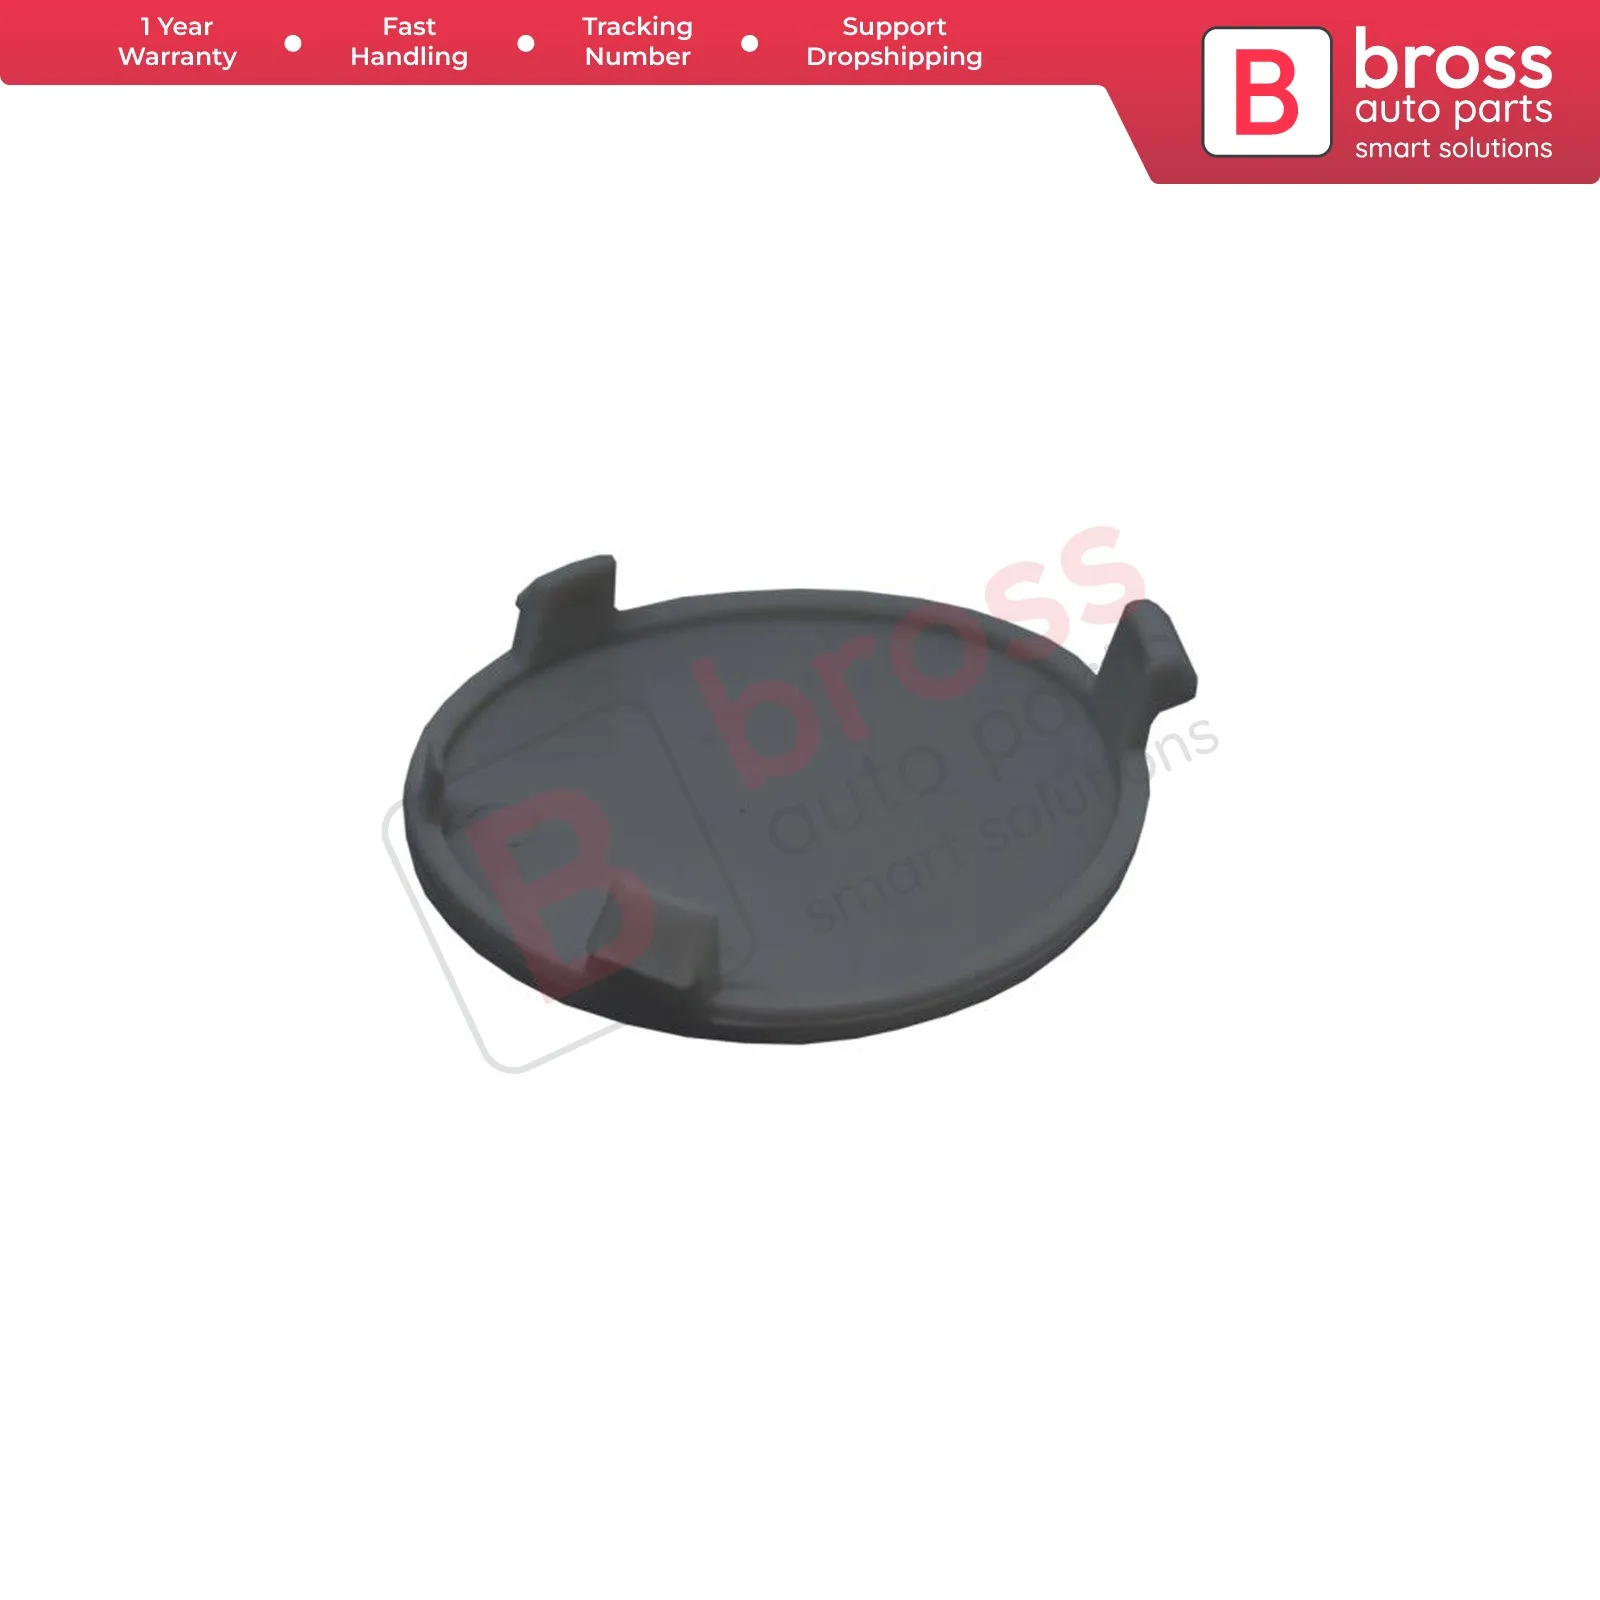 Bross Auto Parts BSP737 Rear Bumper Tow Bar Eye Cover 3 M51R17K922AA for Ford C-Max 2003-2010 Fast Shipment ship From Turkey